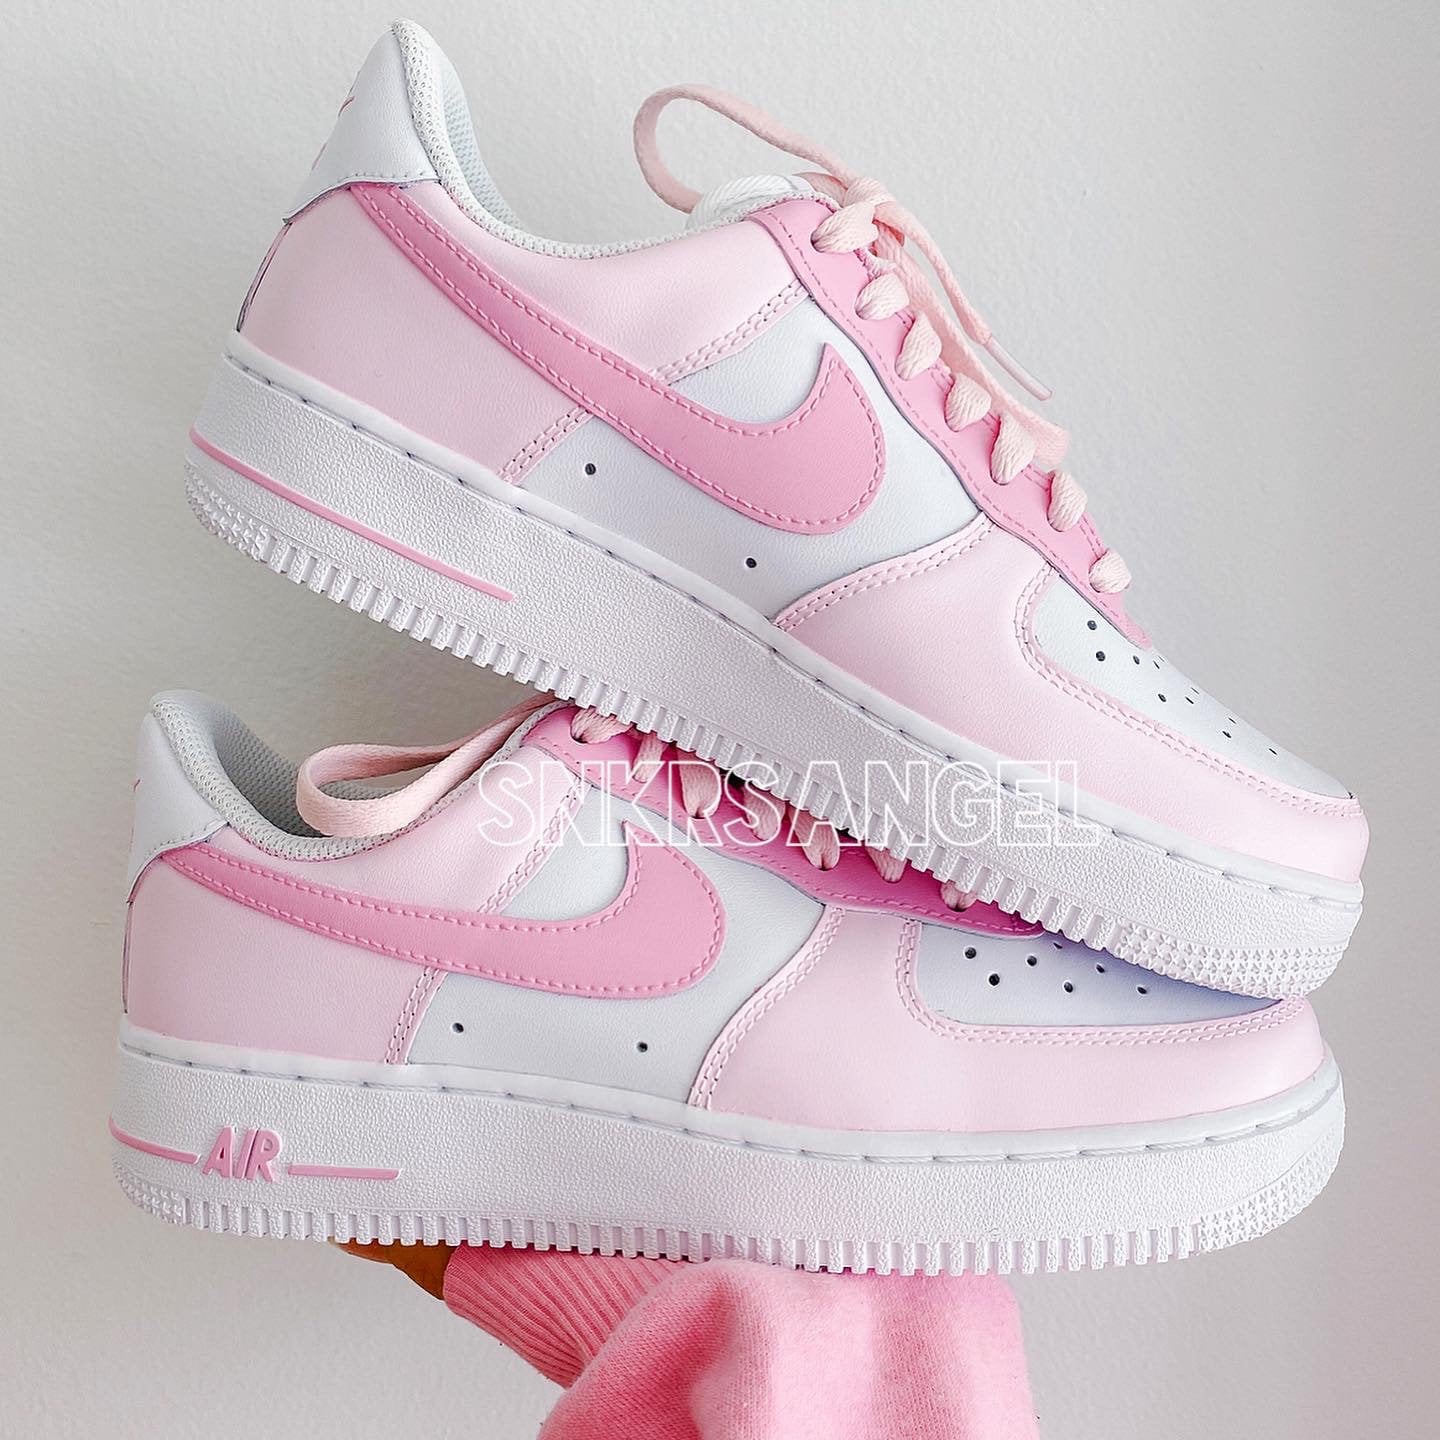 Nike Force 1 Low Pink/hot Pink Sneakers - Etsy